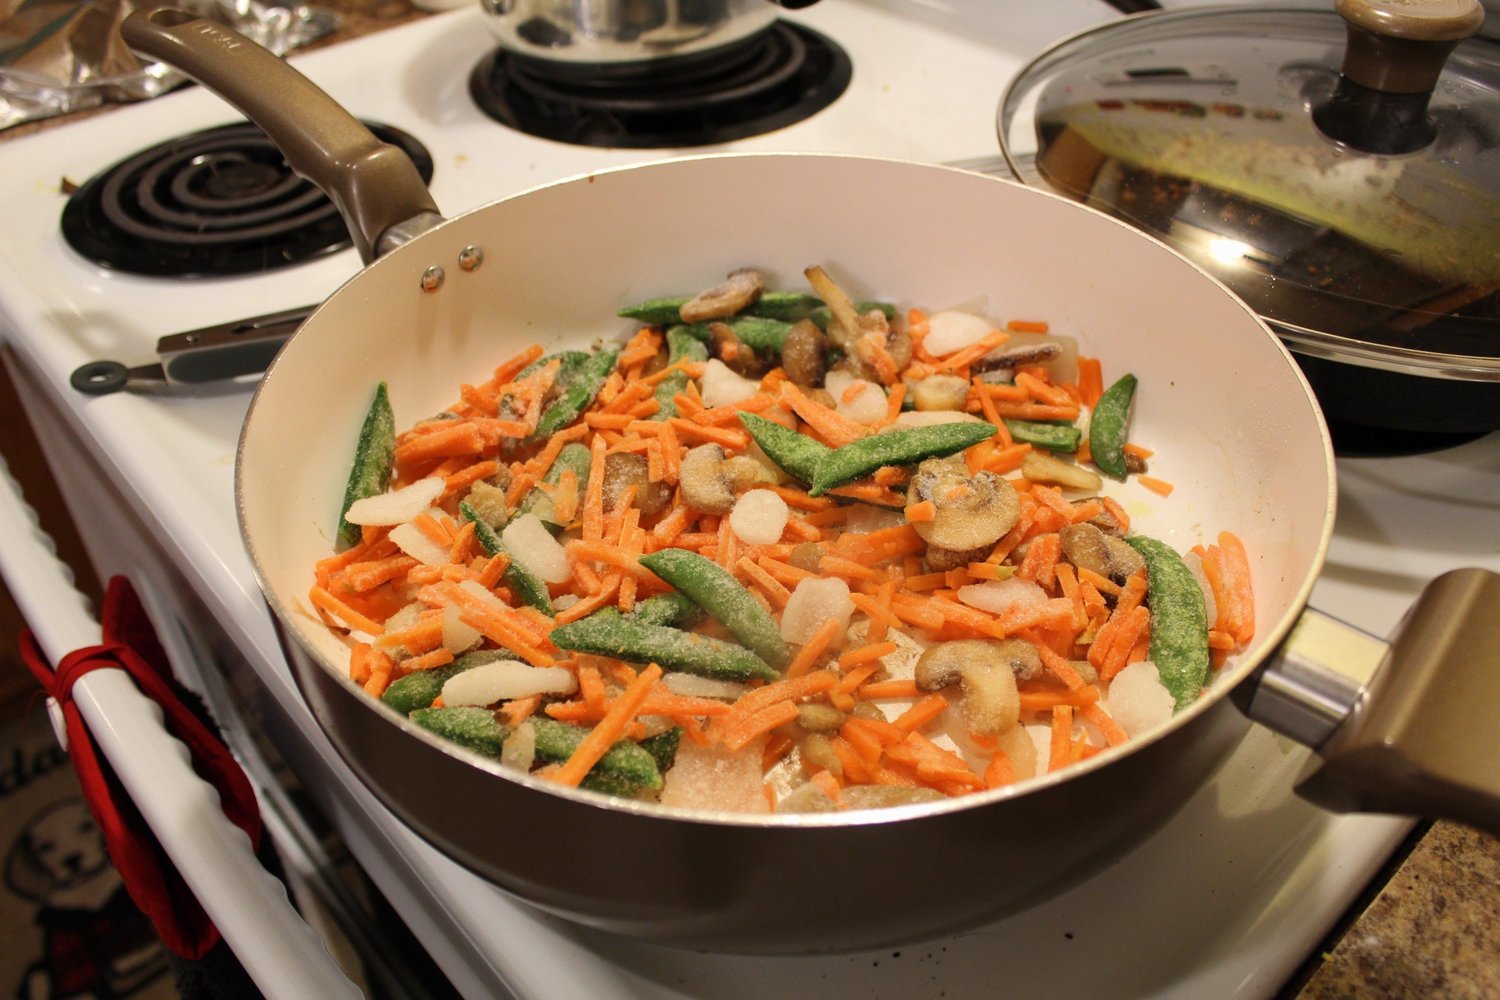 Frozen veggies add more moisture once cooked.